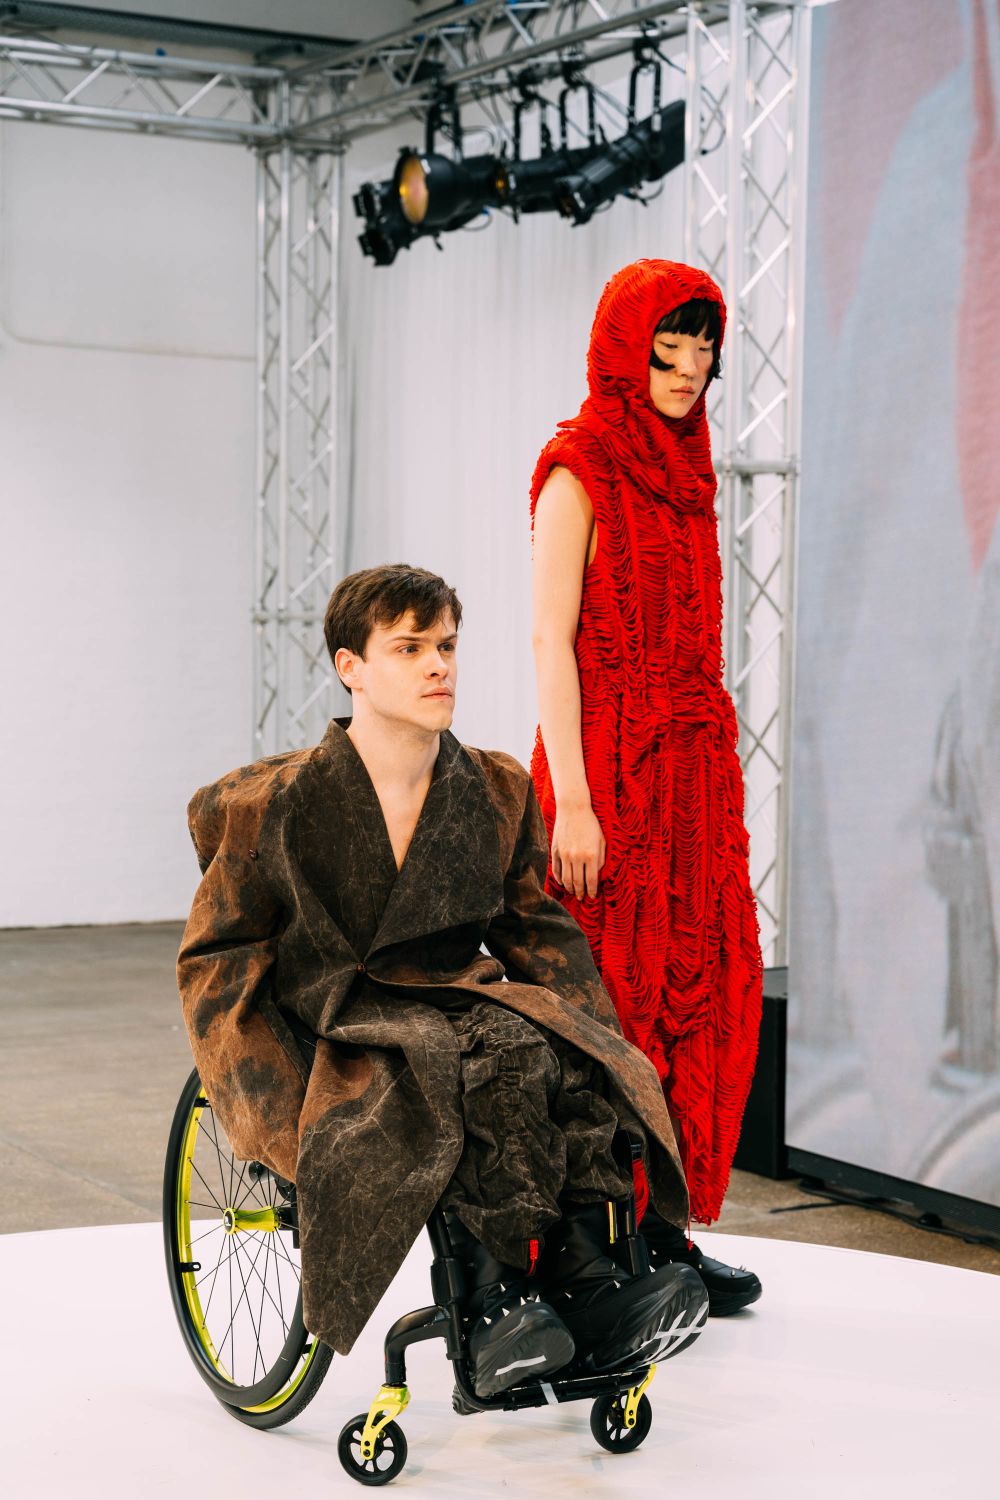 Two models on stage, left using a wheelchair wearing thick brown overcoat, right wearing a red rippled outfit from head to toe